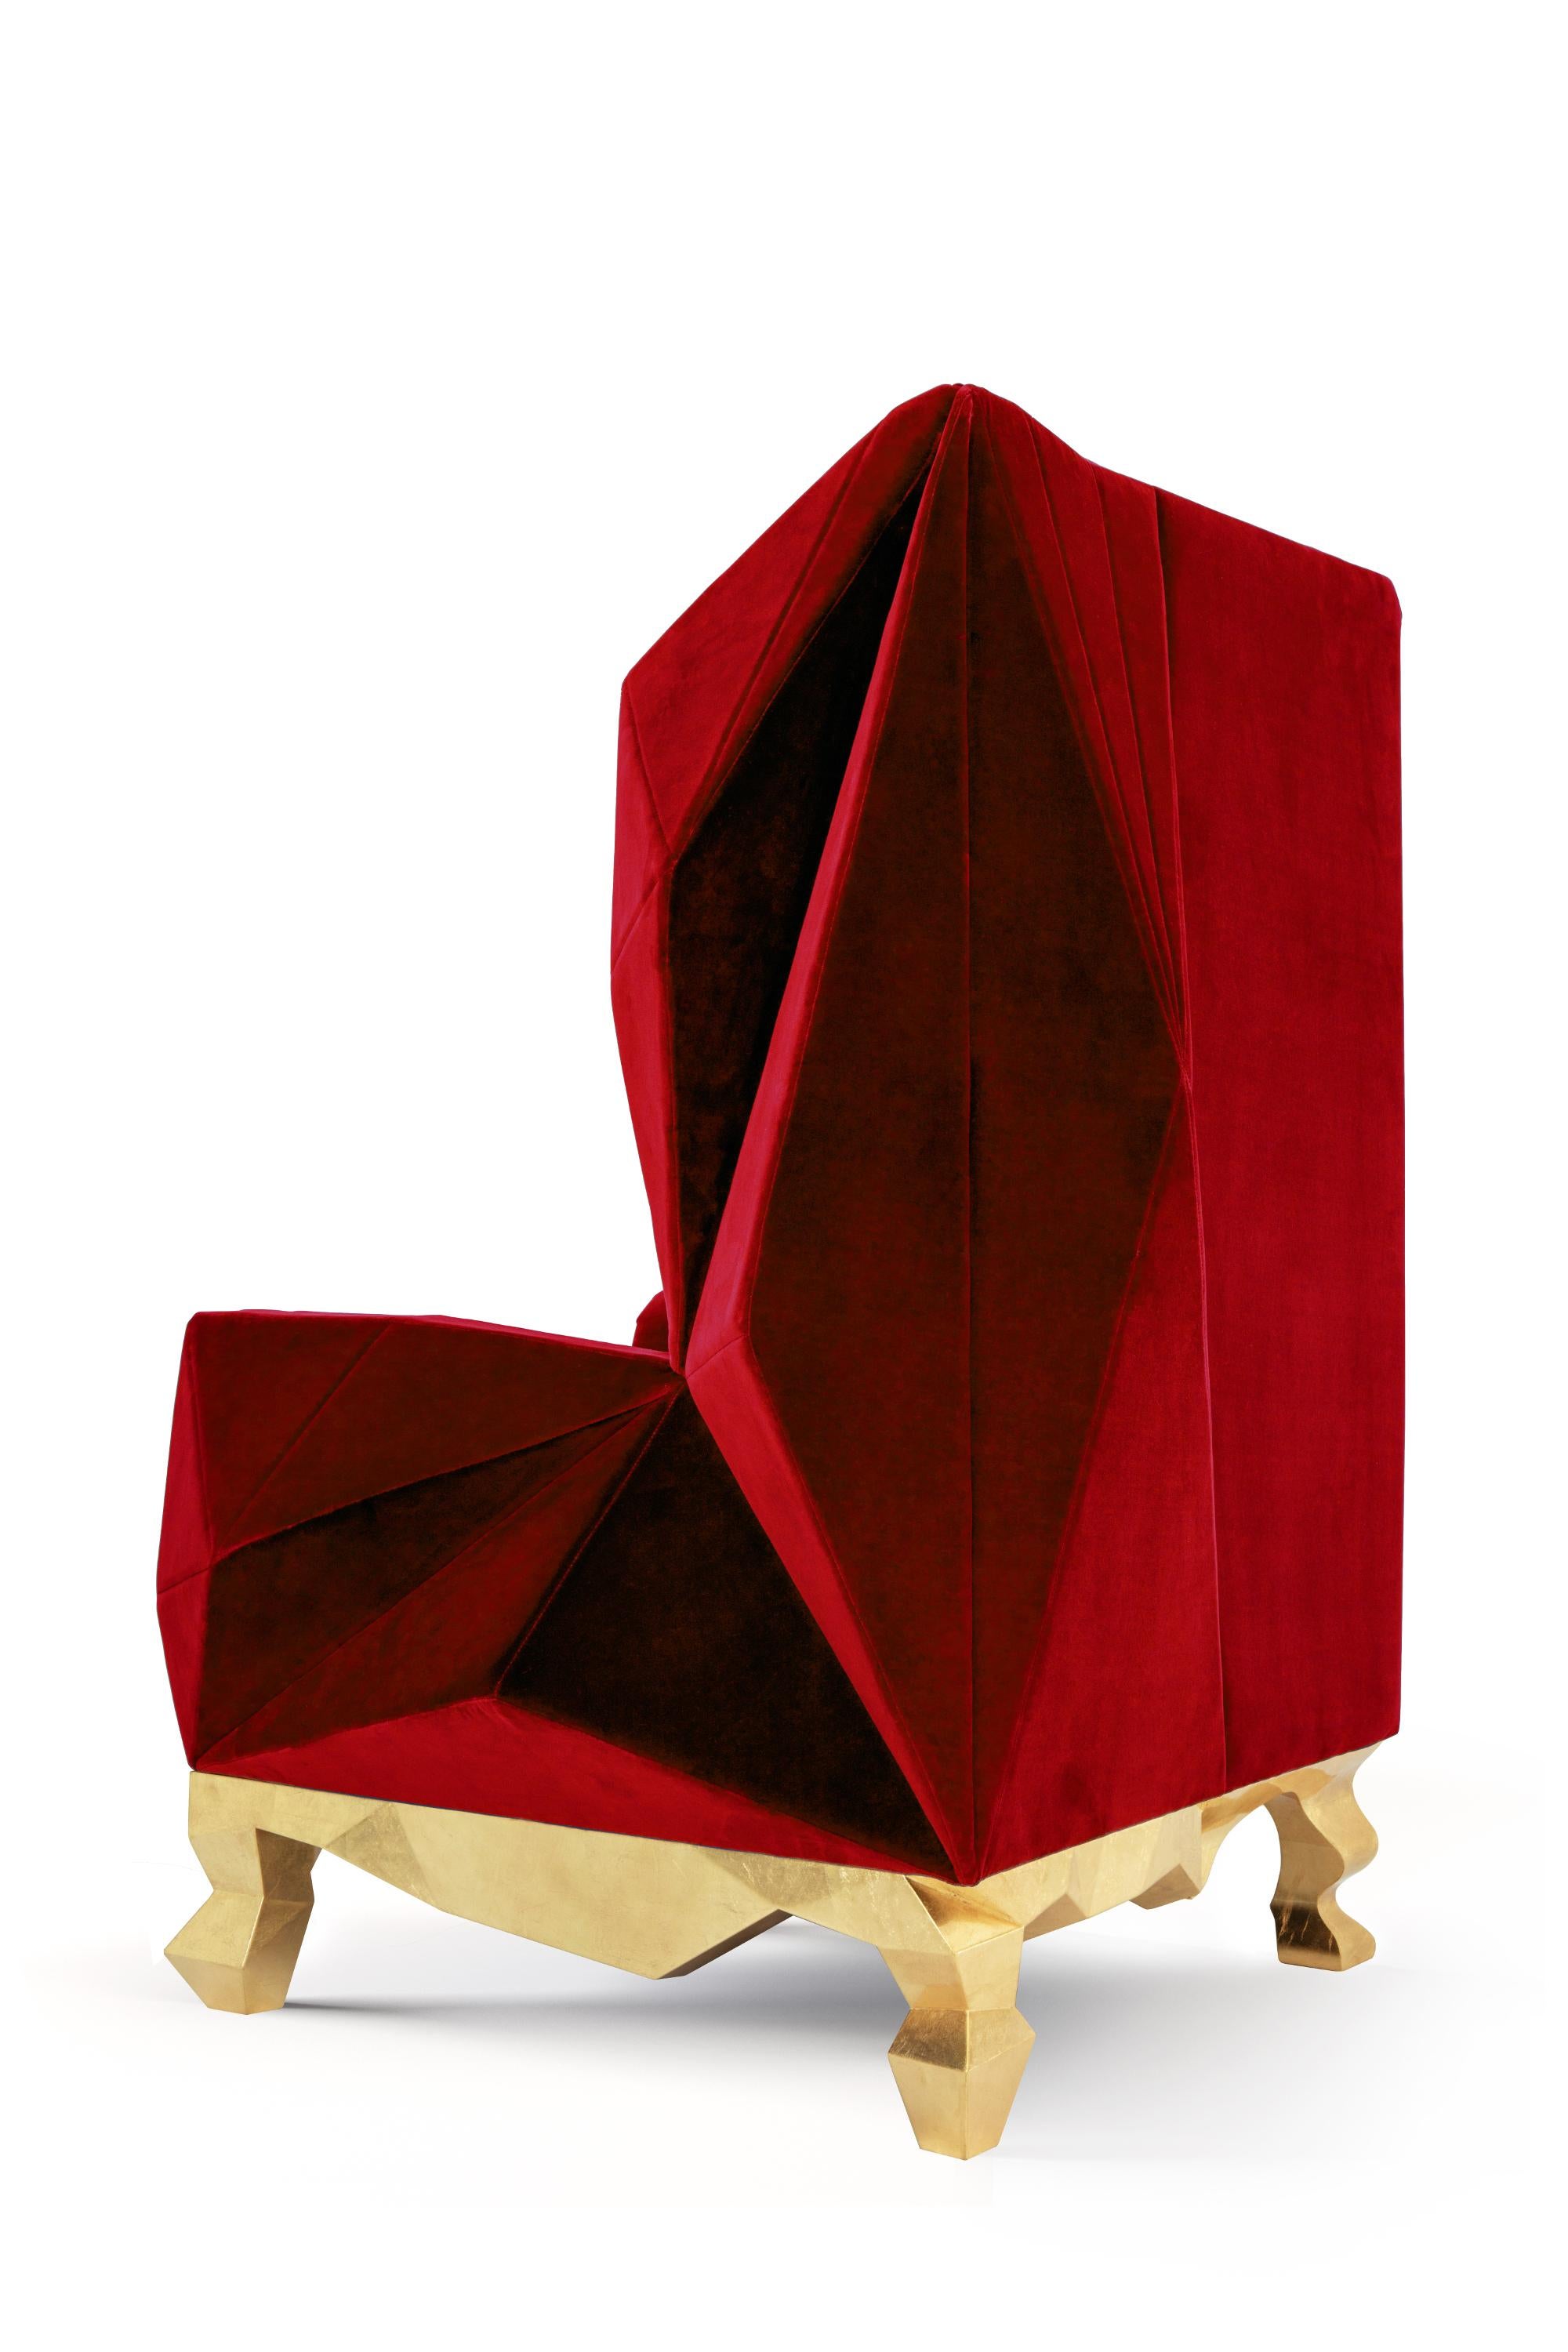 Velvet Ruby rockchair by Royal Stranger
Dimensions: Width 98cm, height 135cm, depth 99cm
Different upholstery colors and finishes are available. Brass, copper or stainless steel in polished or brushed finish.
Materials: velvet on the top of the